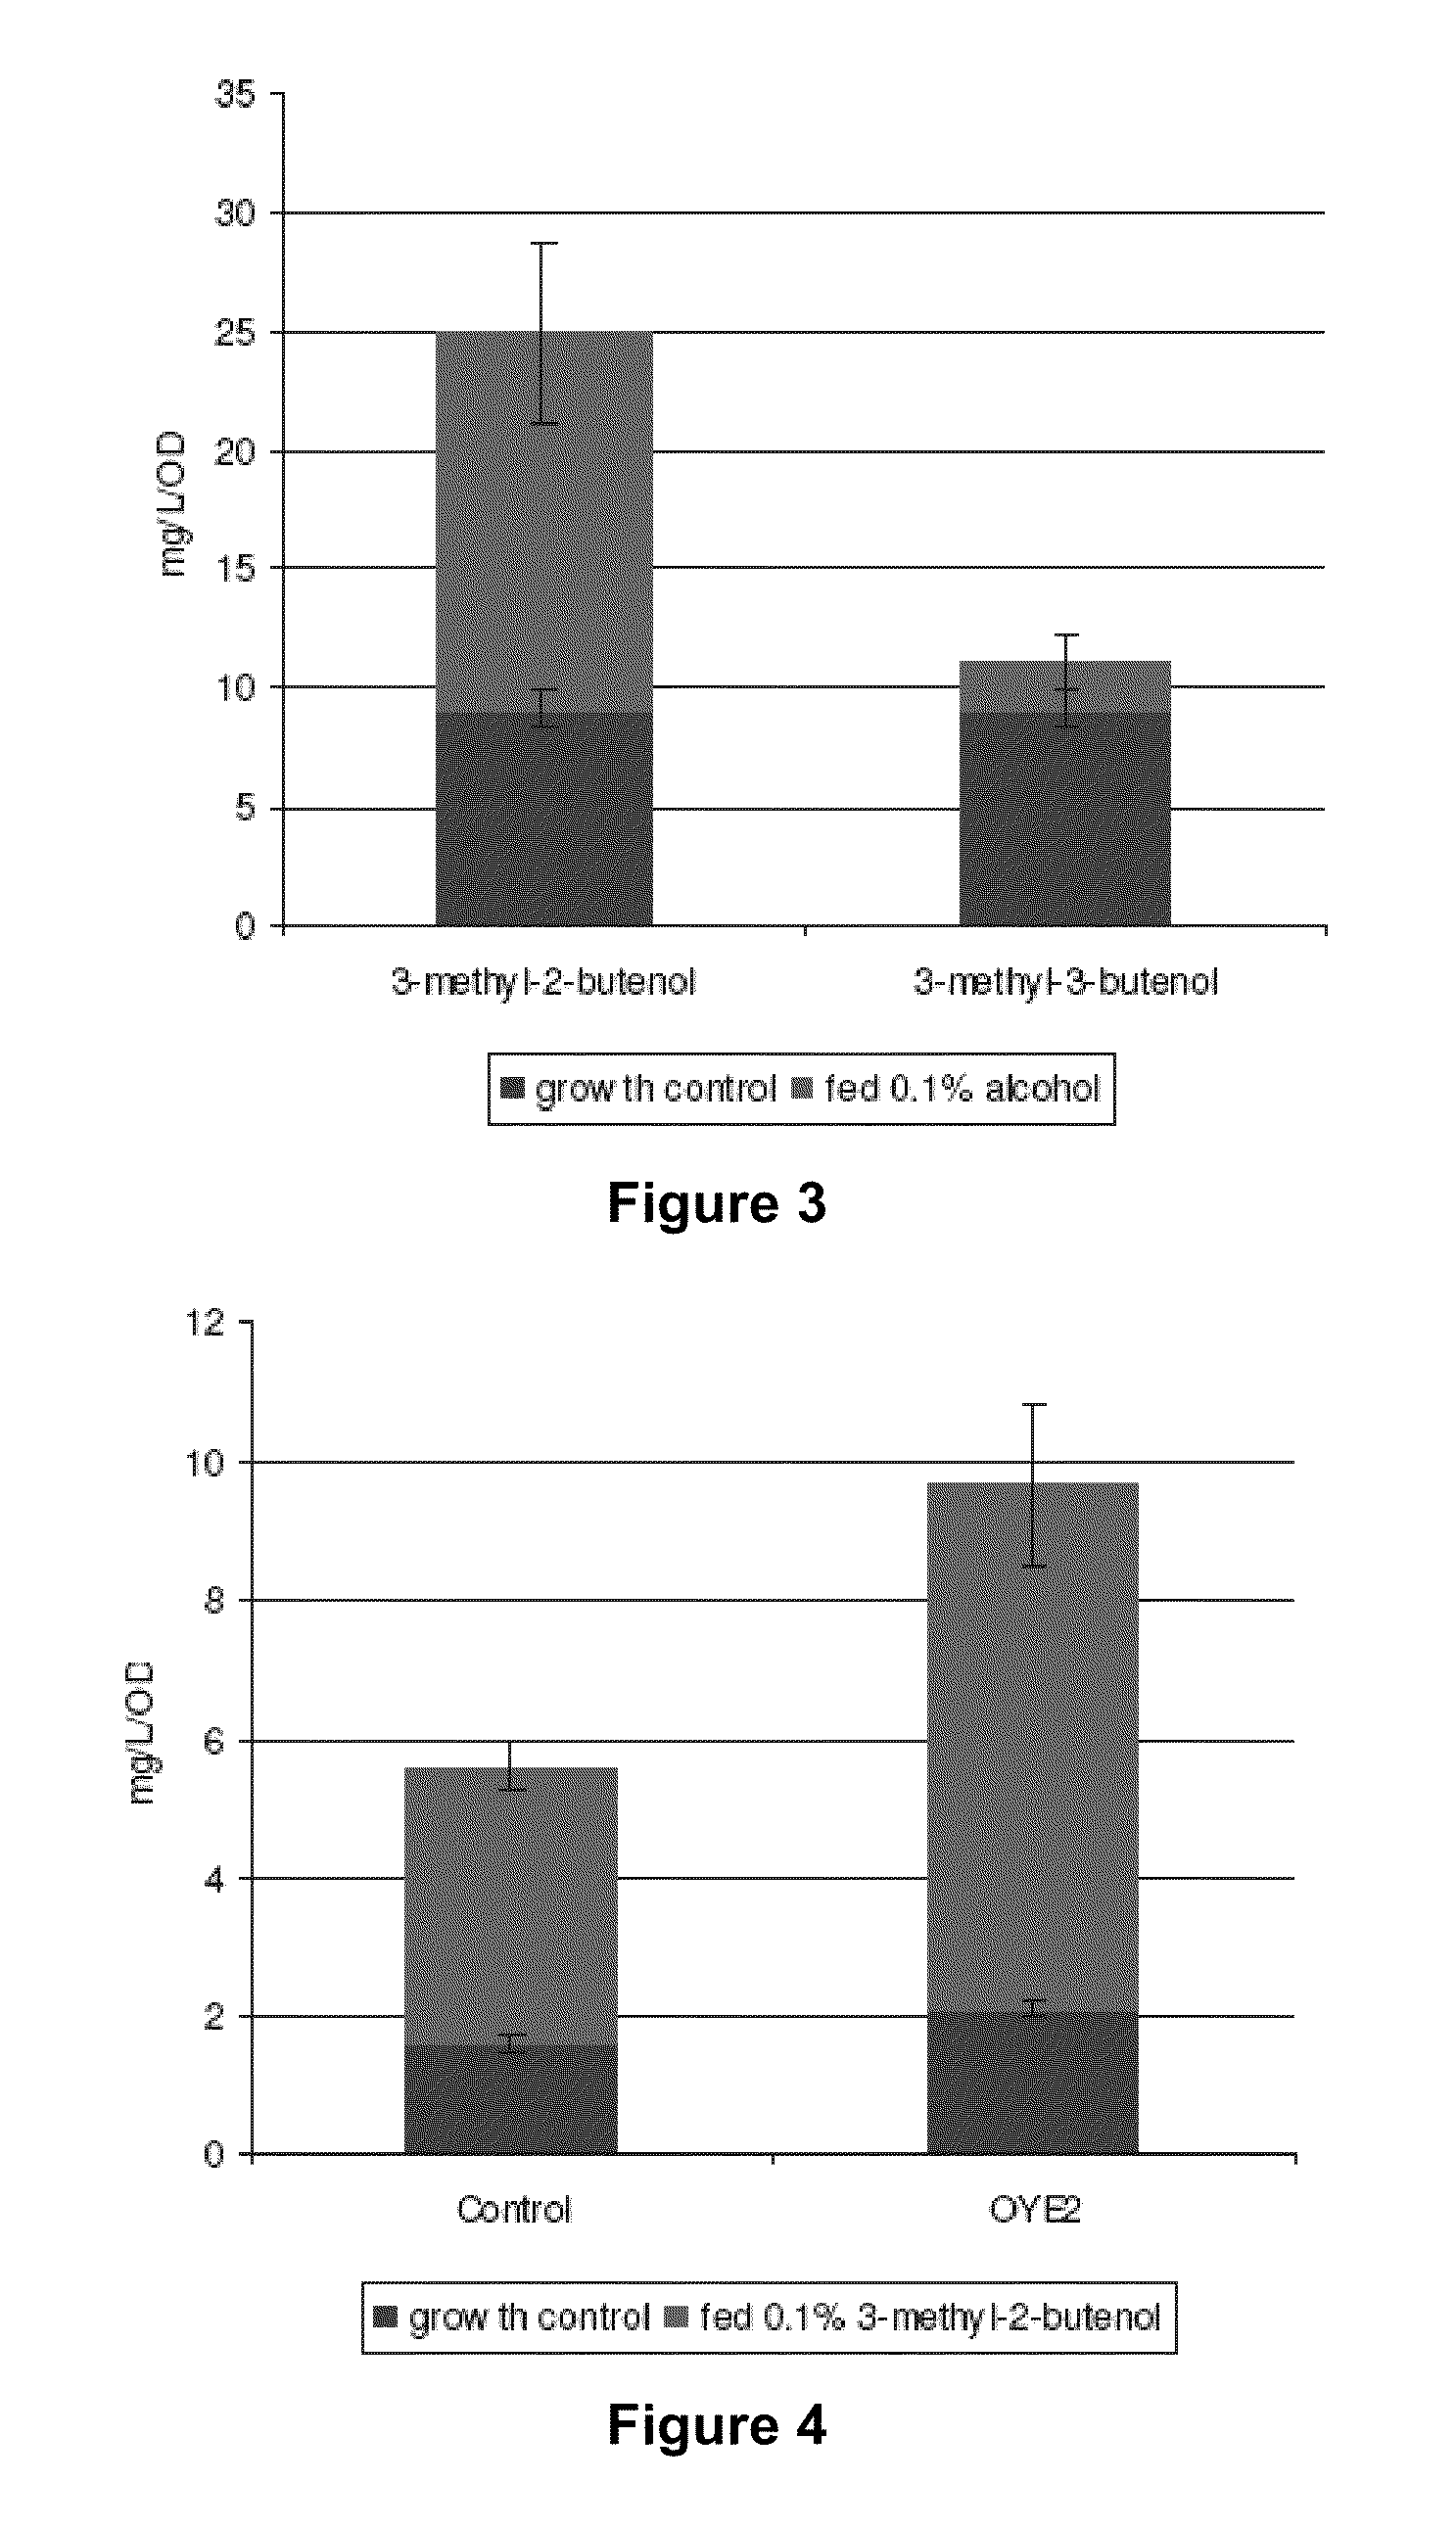 Host Cells and Methods for Producing 3-Methyl-2-buten-1-ol, 3-Methyl-3-buten-1-ol, and 3-Methyl-butan-1-ol